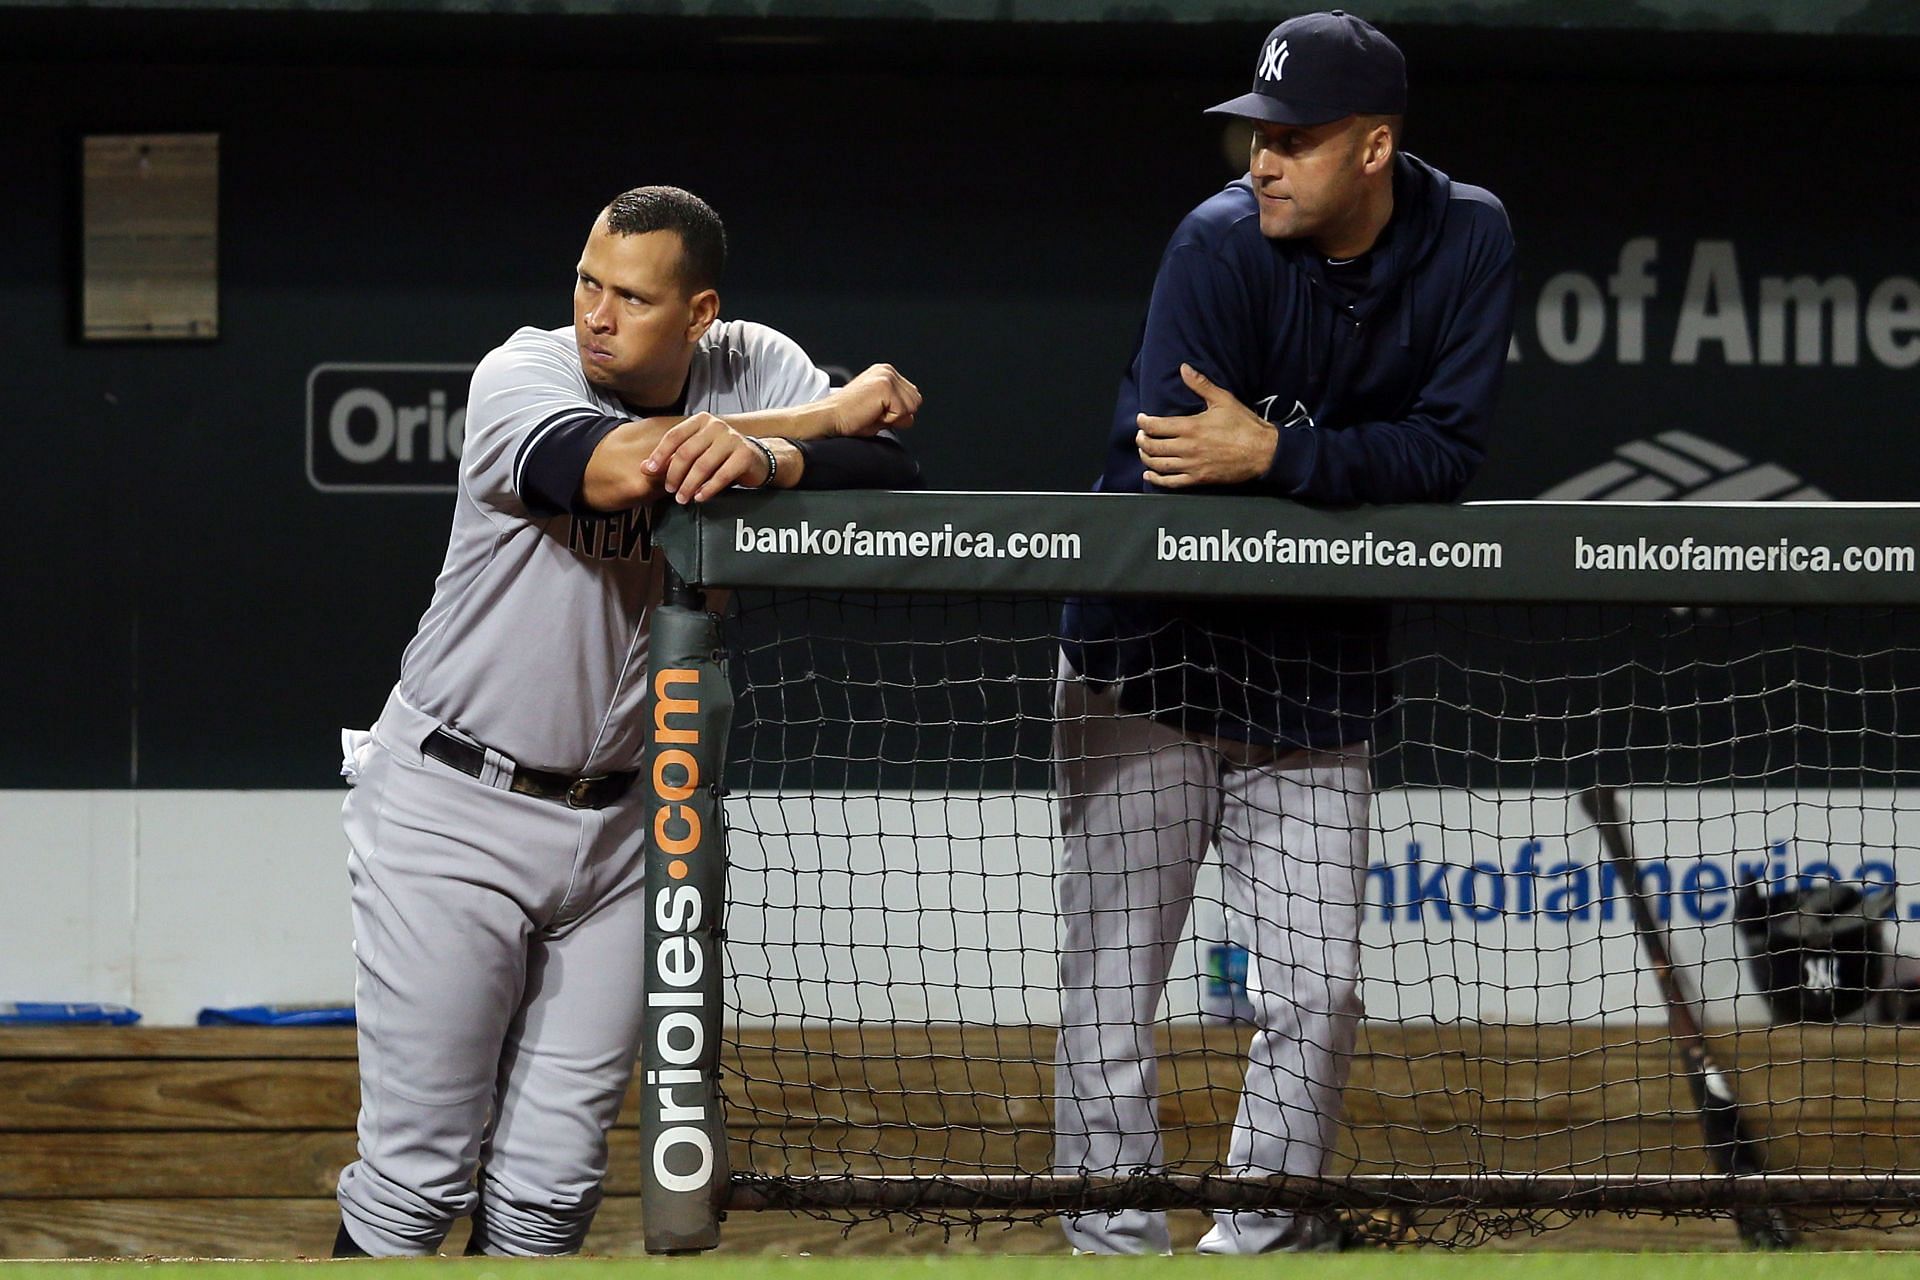 Jeter and A-Rod hang out in the dugout during a New York Yankees v Baltimore Orioles game.